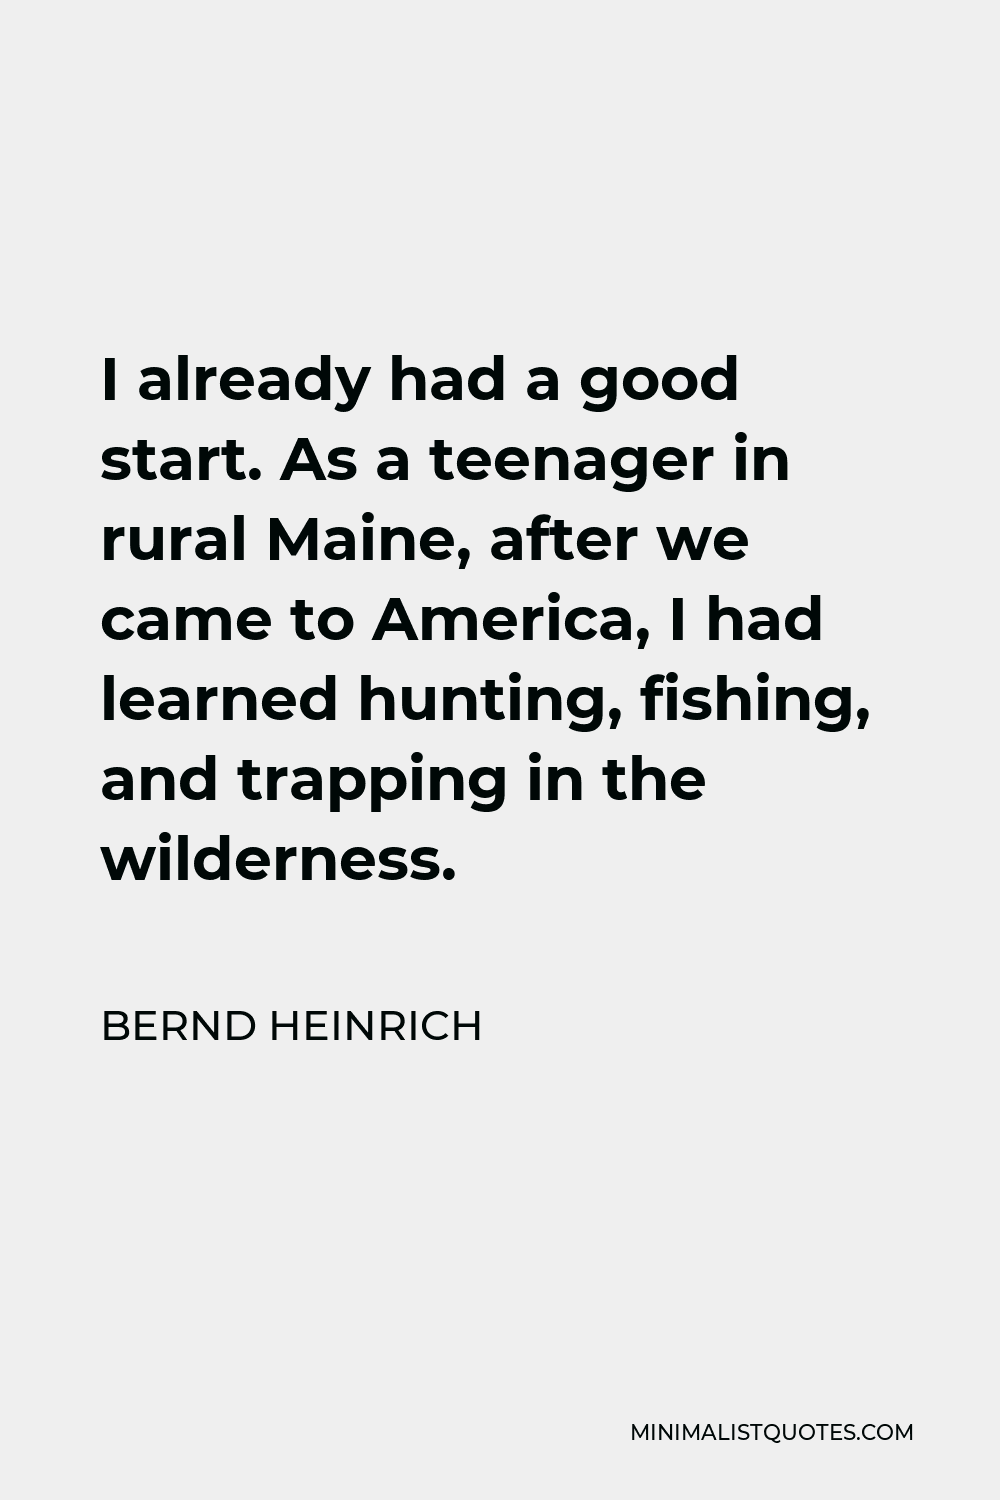 Bernd Heinrich Quote - I already had a good start. As a teenager in rural Maine, after we came to America, I had learned hunting, fishing, and trapping in the wilderness.